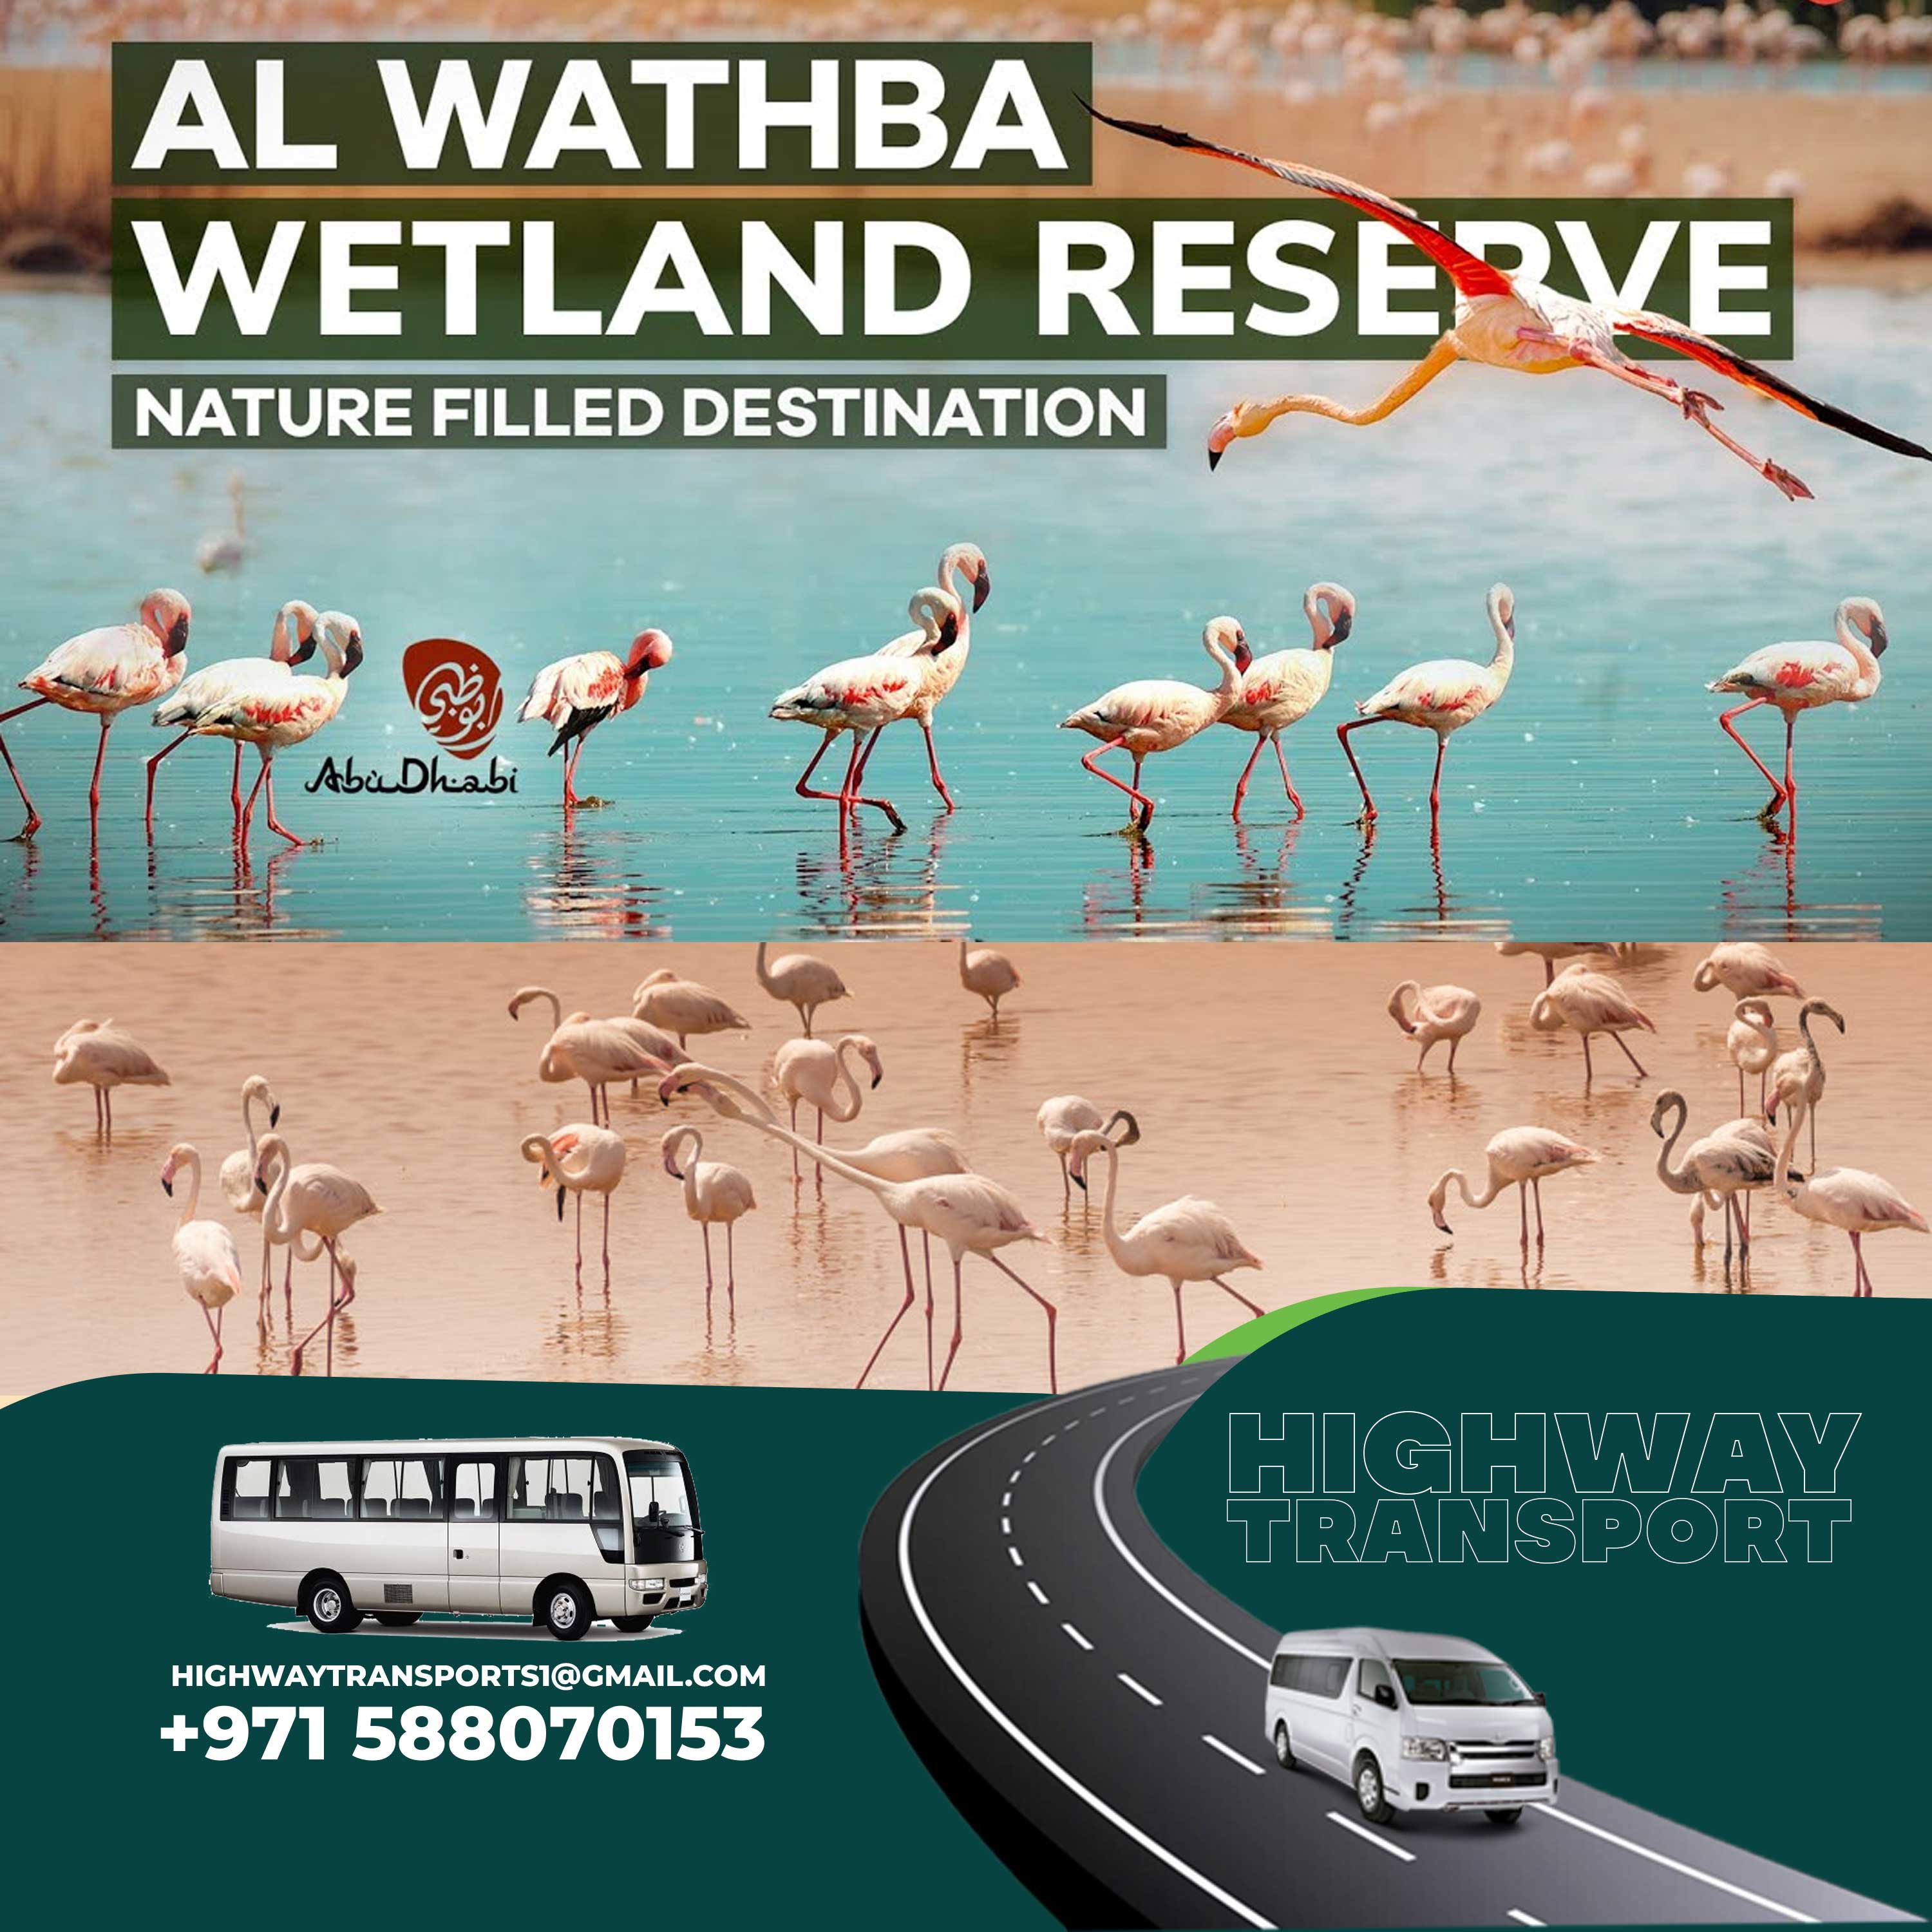 Al Wathba Wetland Reserve featuring species spotting, visiting times, regulations, and activities